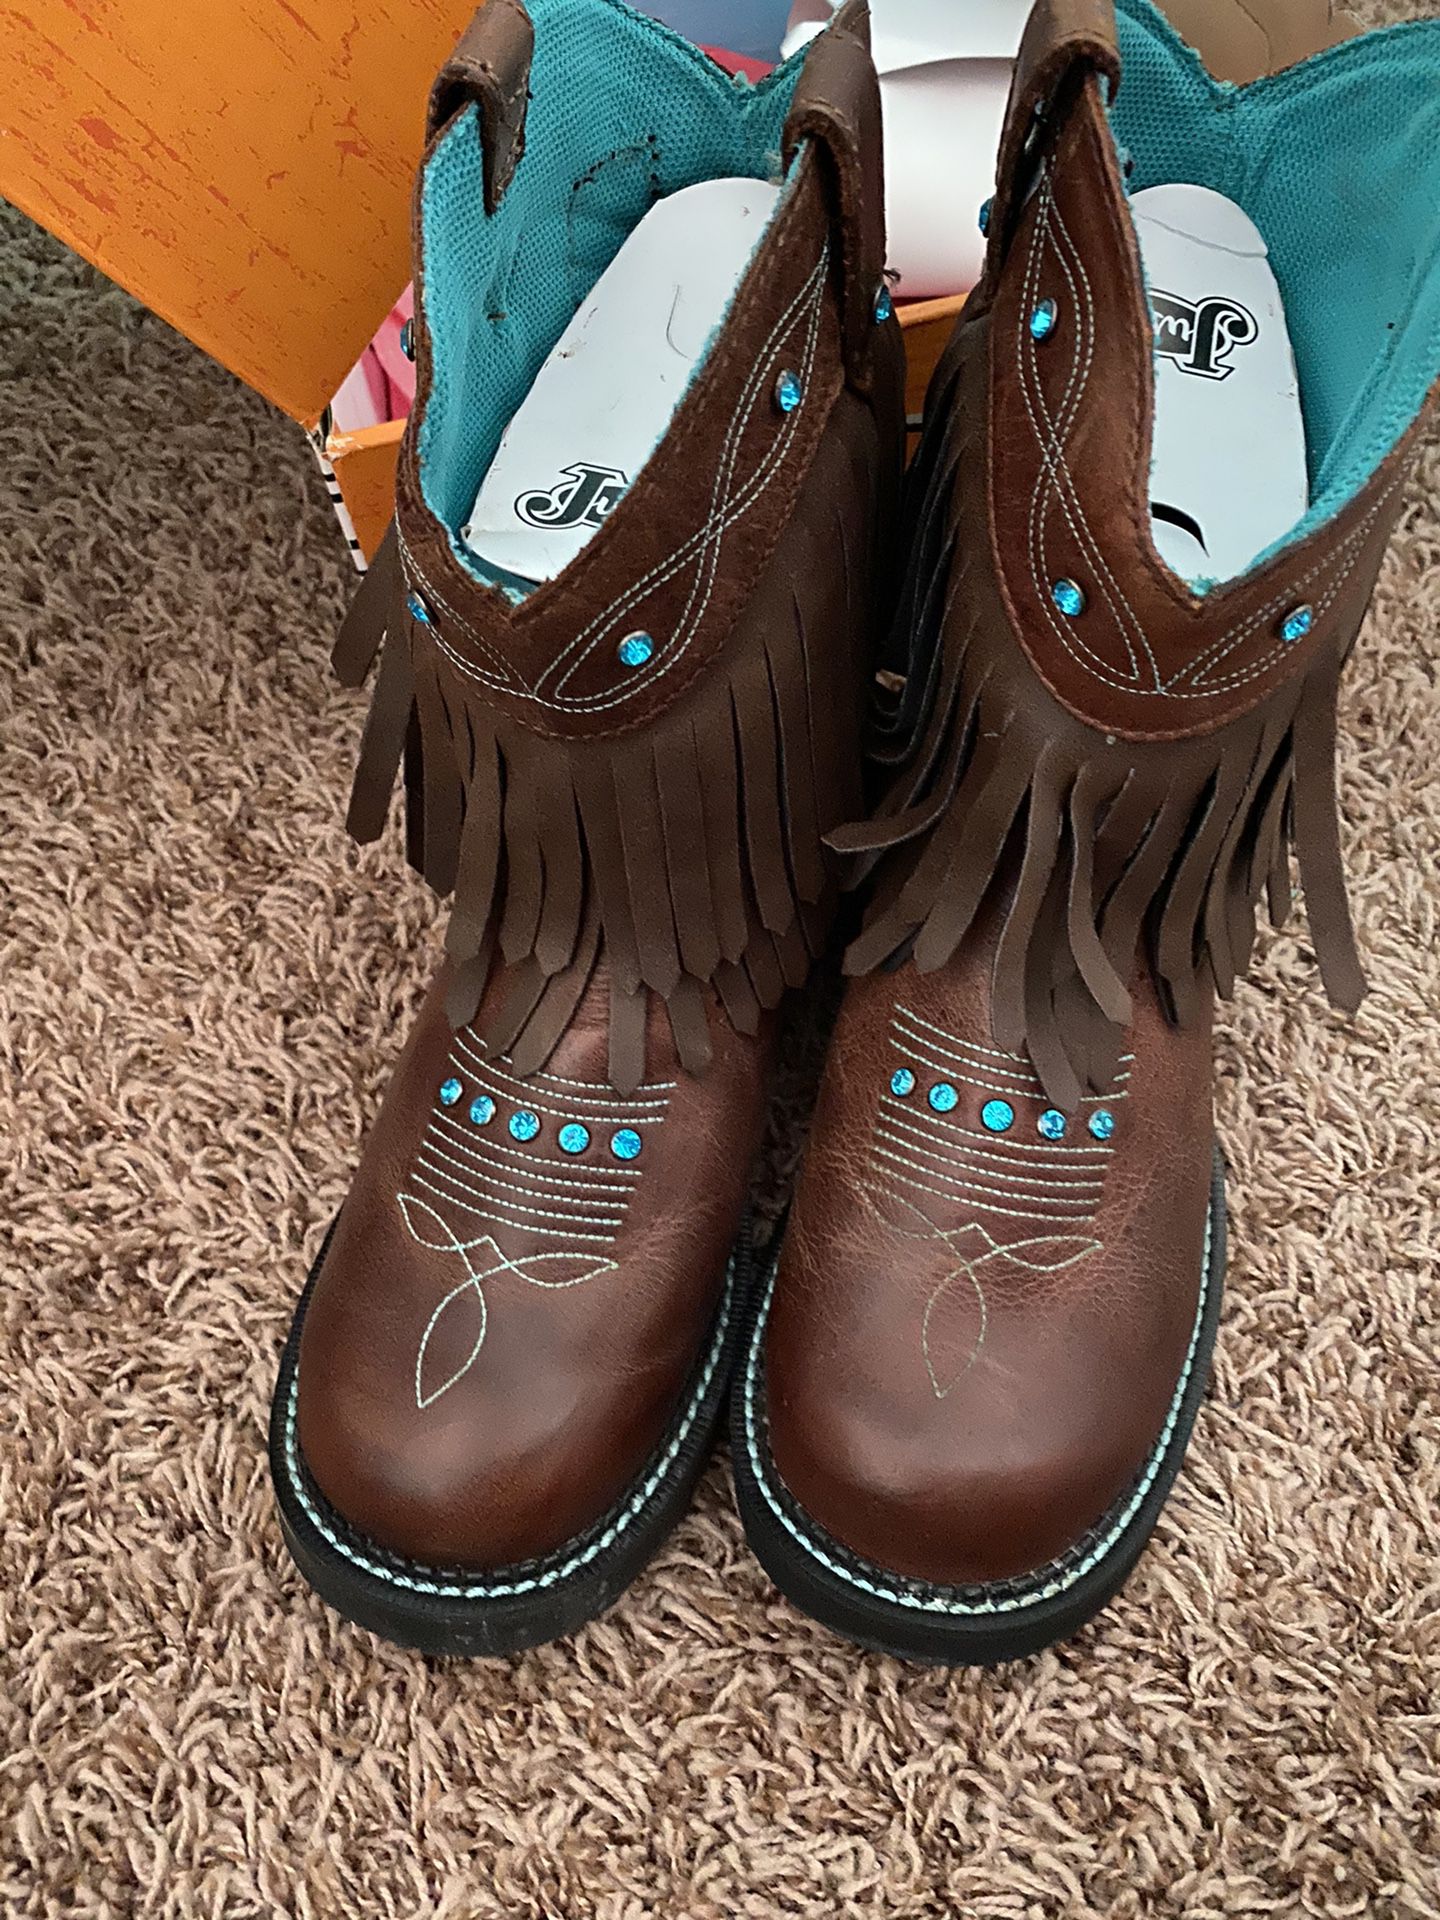 Justin Boots Brand New size 9